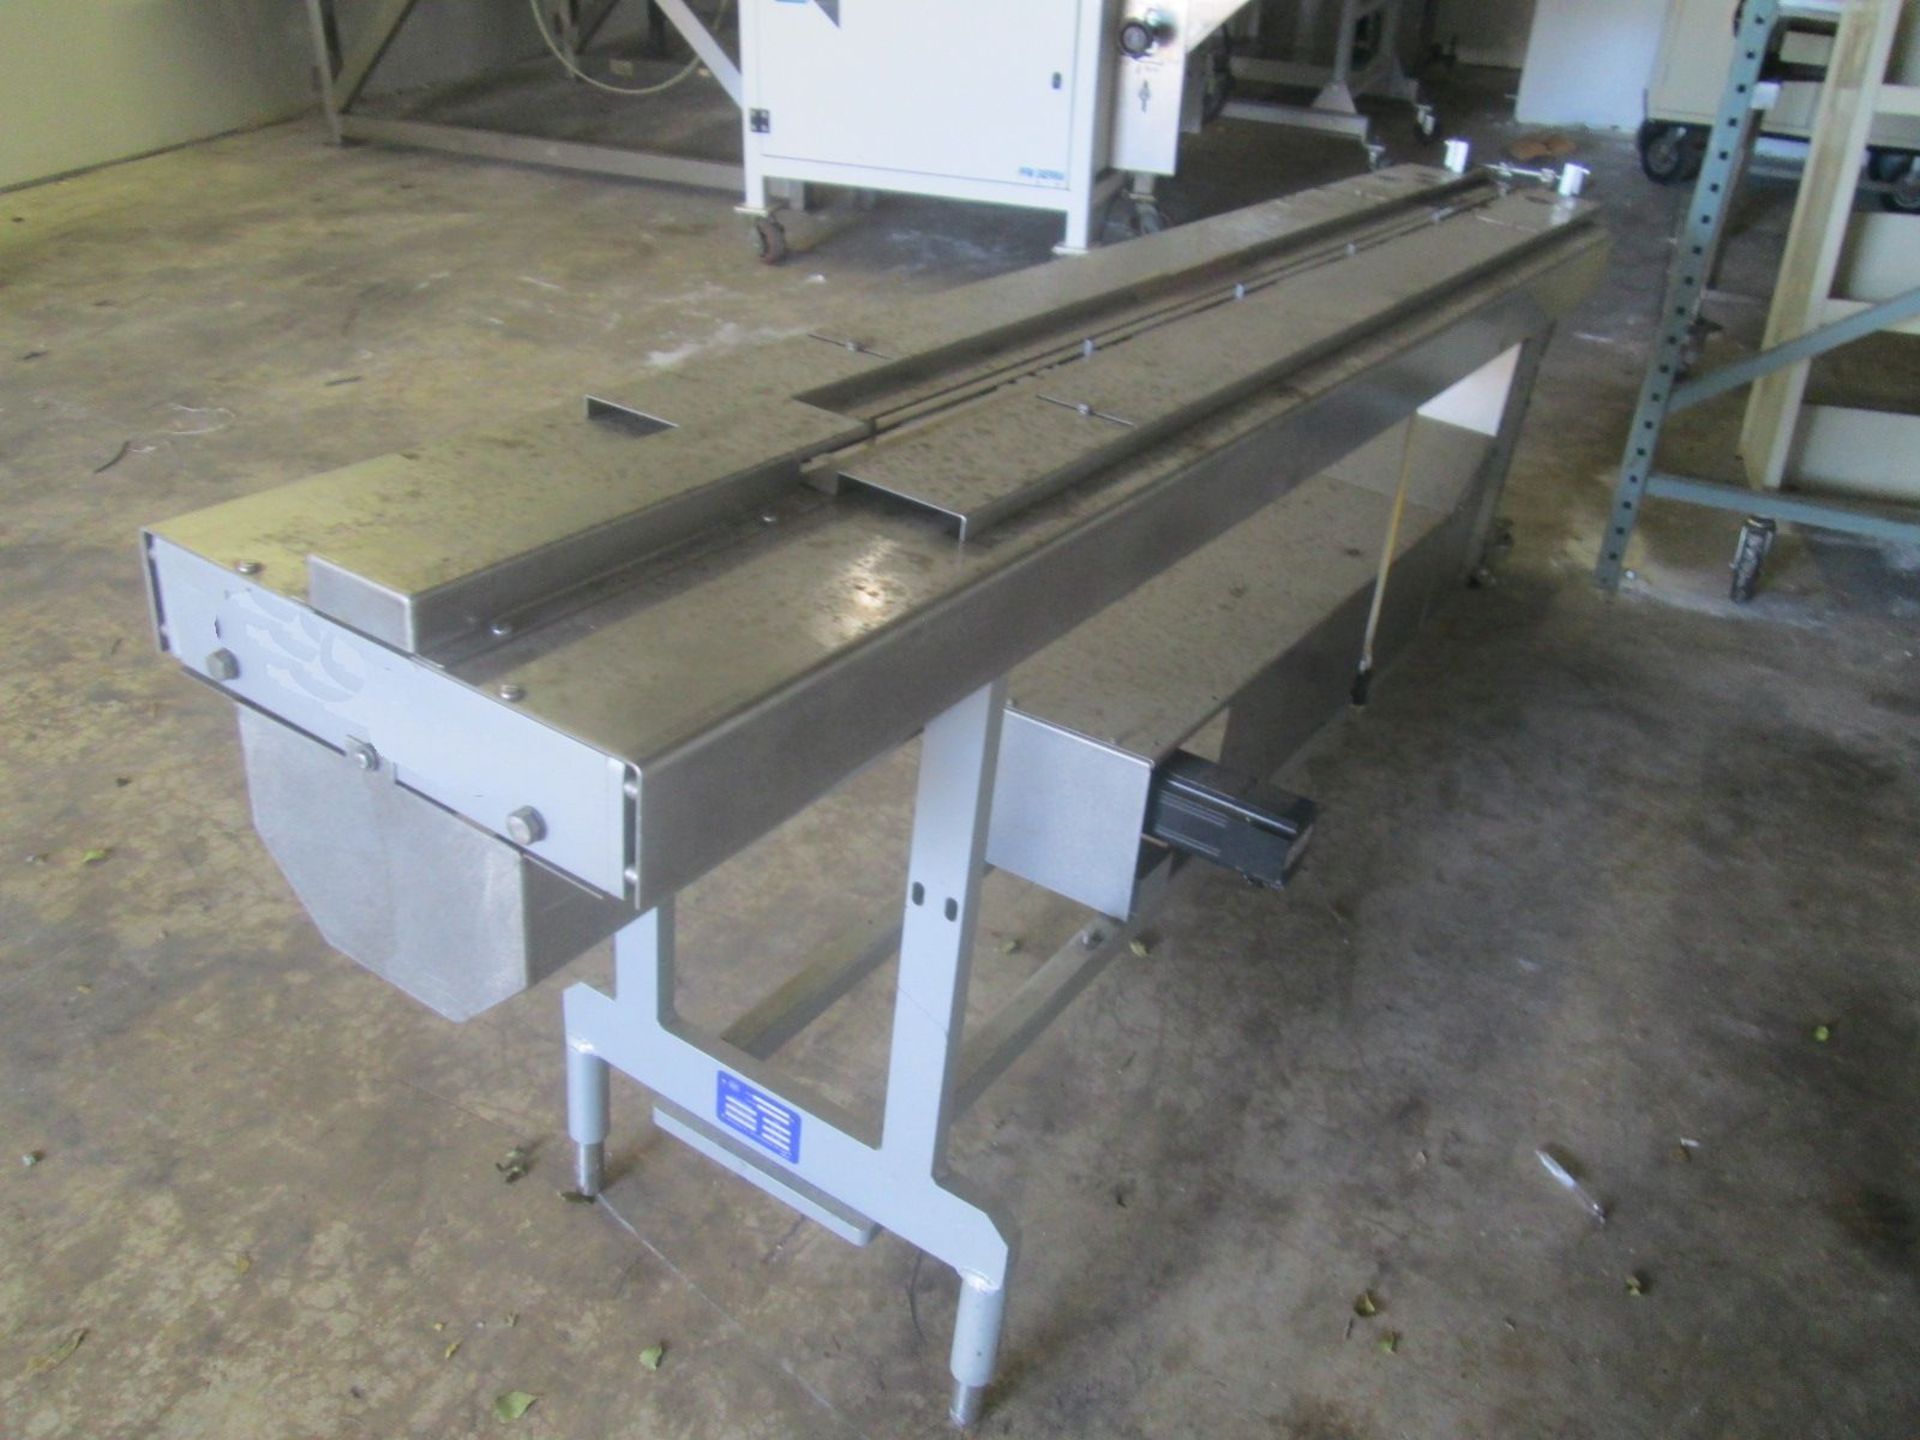 Sig Doboy CrossFeede Serial number 03-24859, Inclined Cleated Rollaway Stainless Steel Conveyor - Image 6 of 8